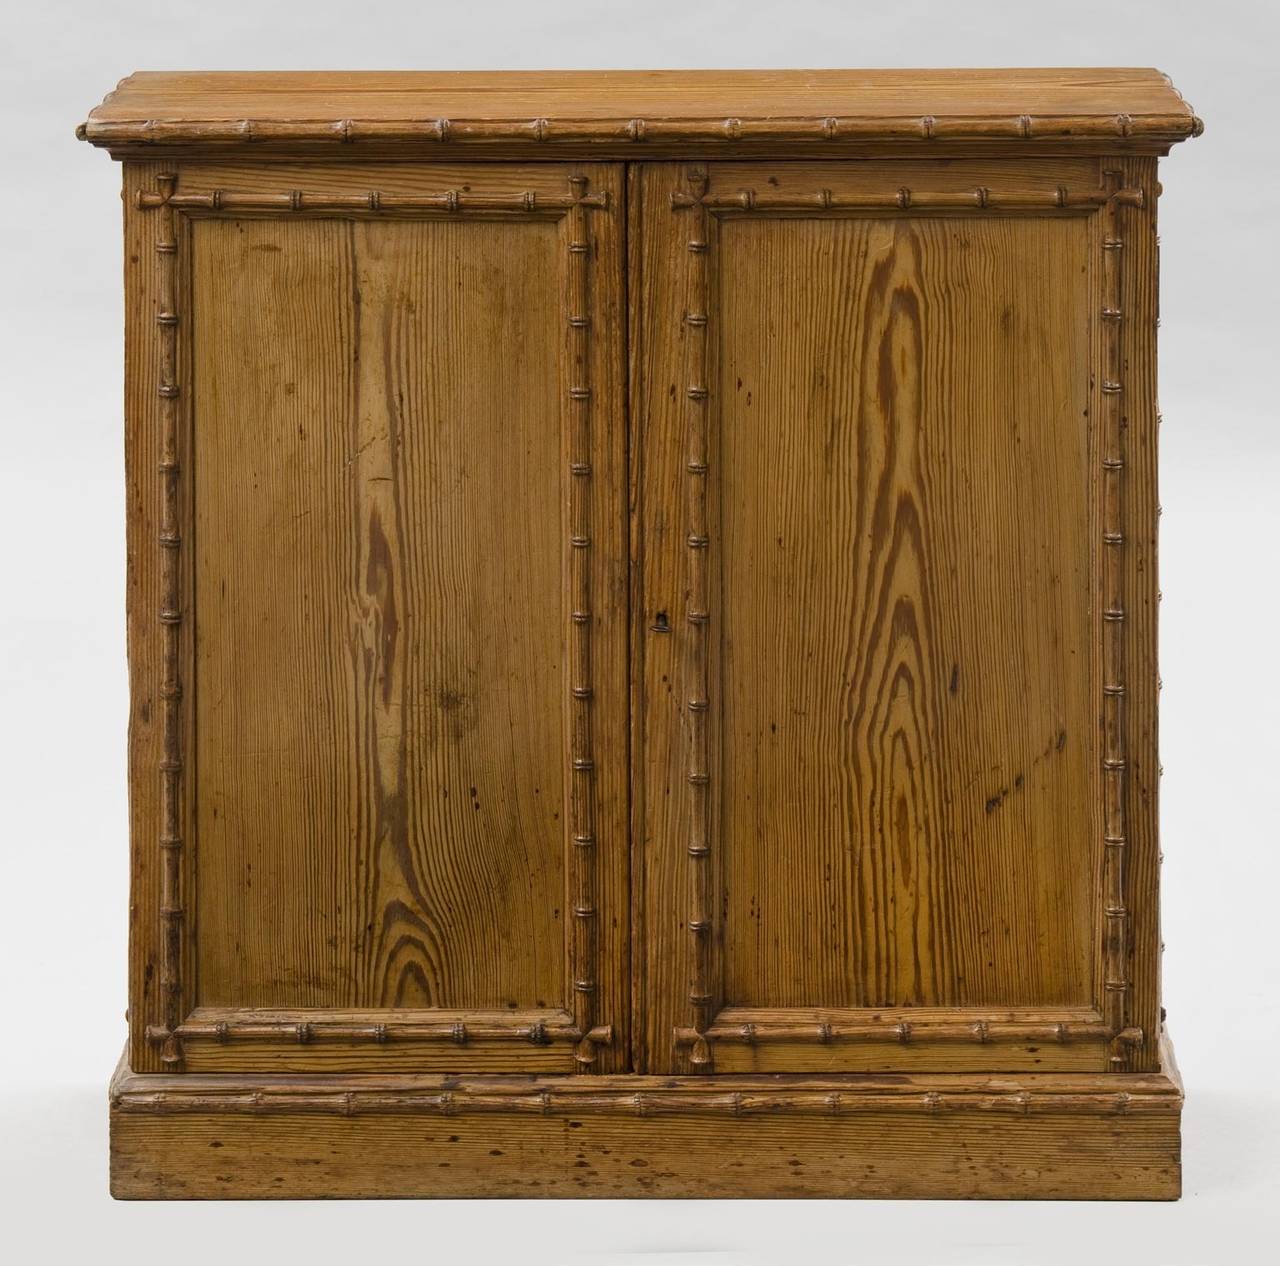 Pine two-door cupboard or cabinet with carved faux bamboo moldings around the top edge, the doors, sides and base. The doors open to reveal two adjustable shelves.

Item #7005